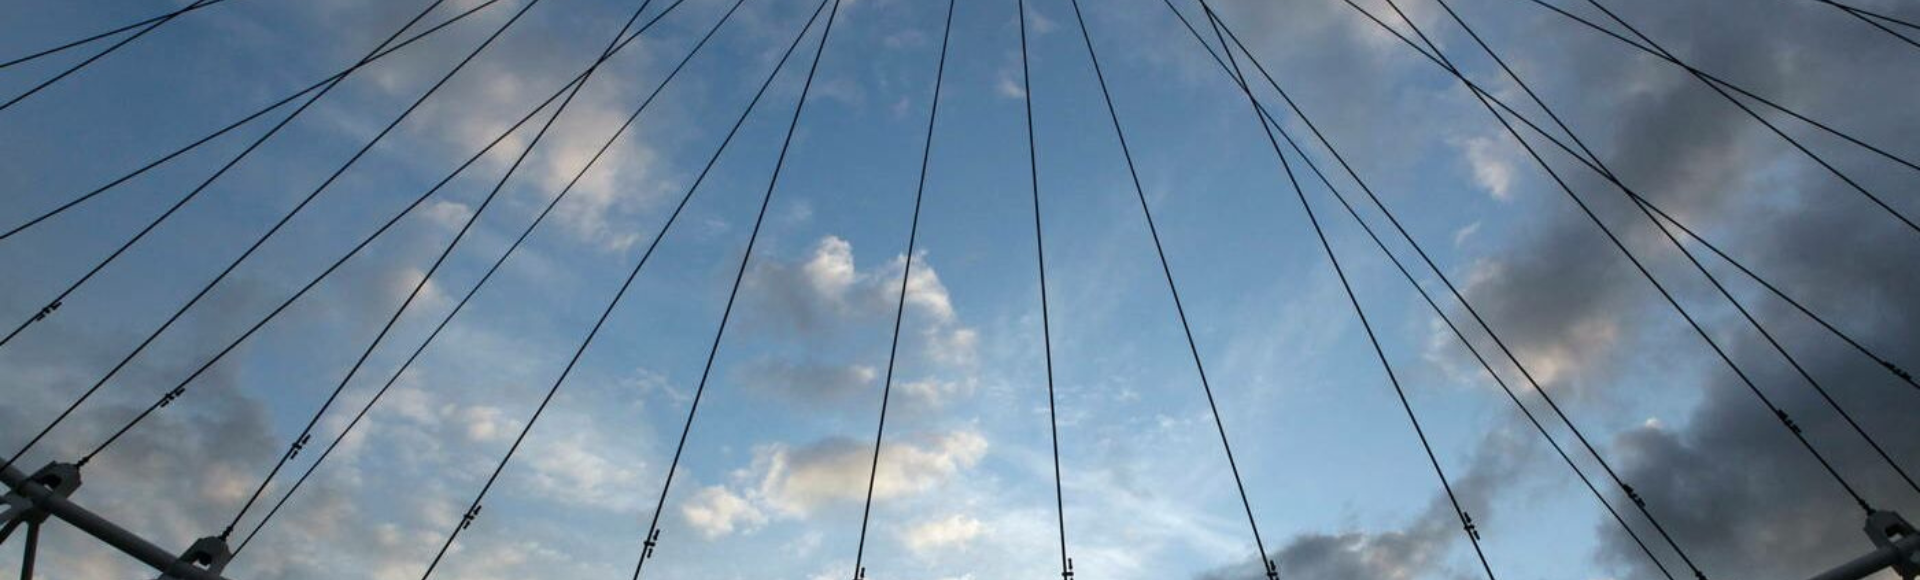 London_eye_Consulting_banner(1920 × 580 px)